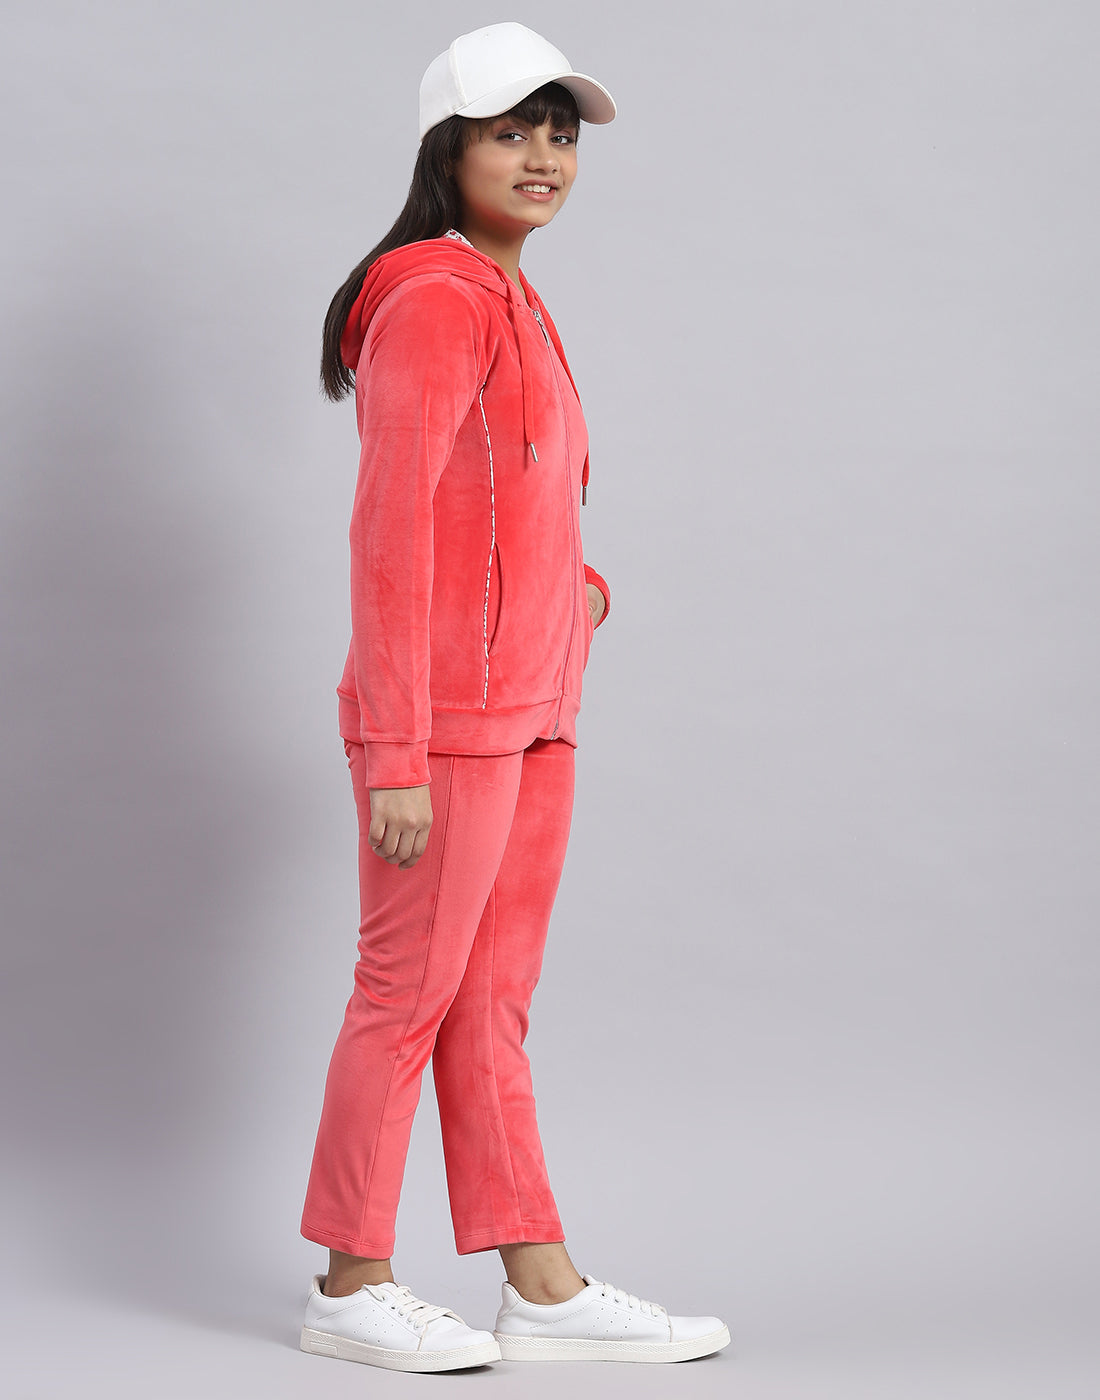 Girls Pink Solid Hooded Full Sleeve Tracksuit